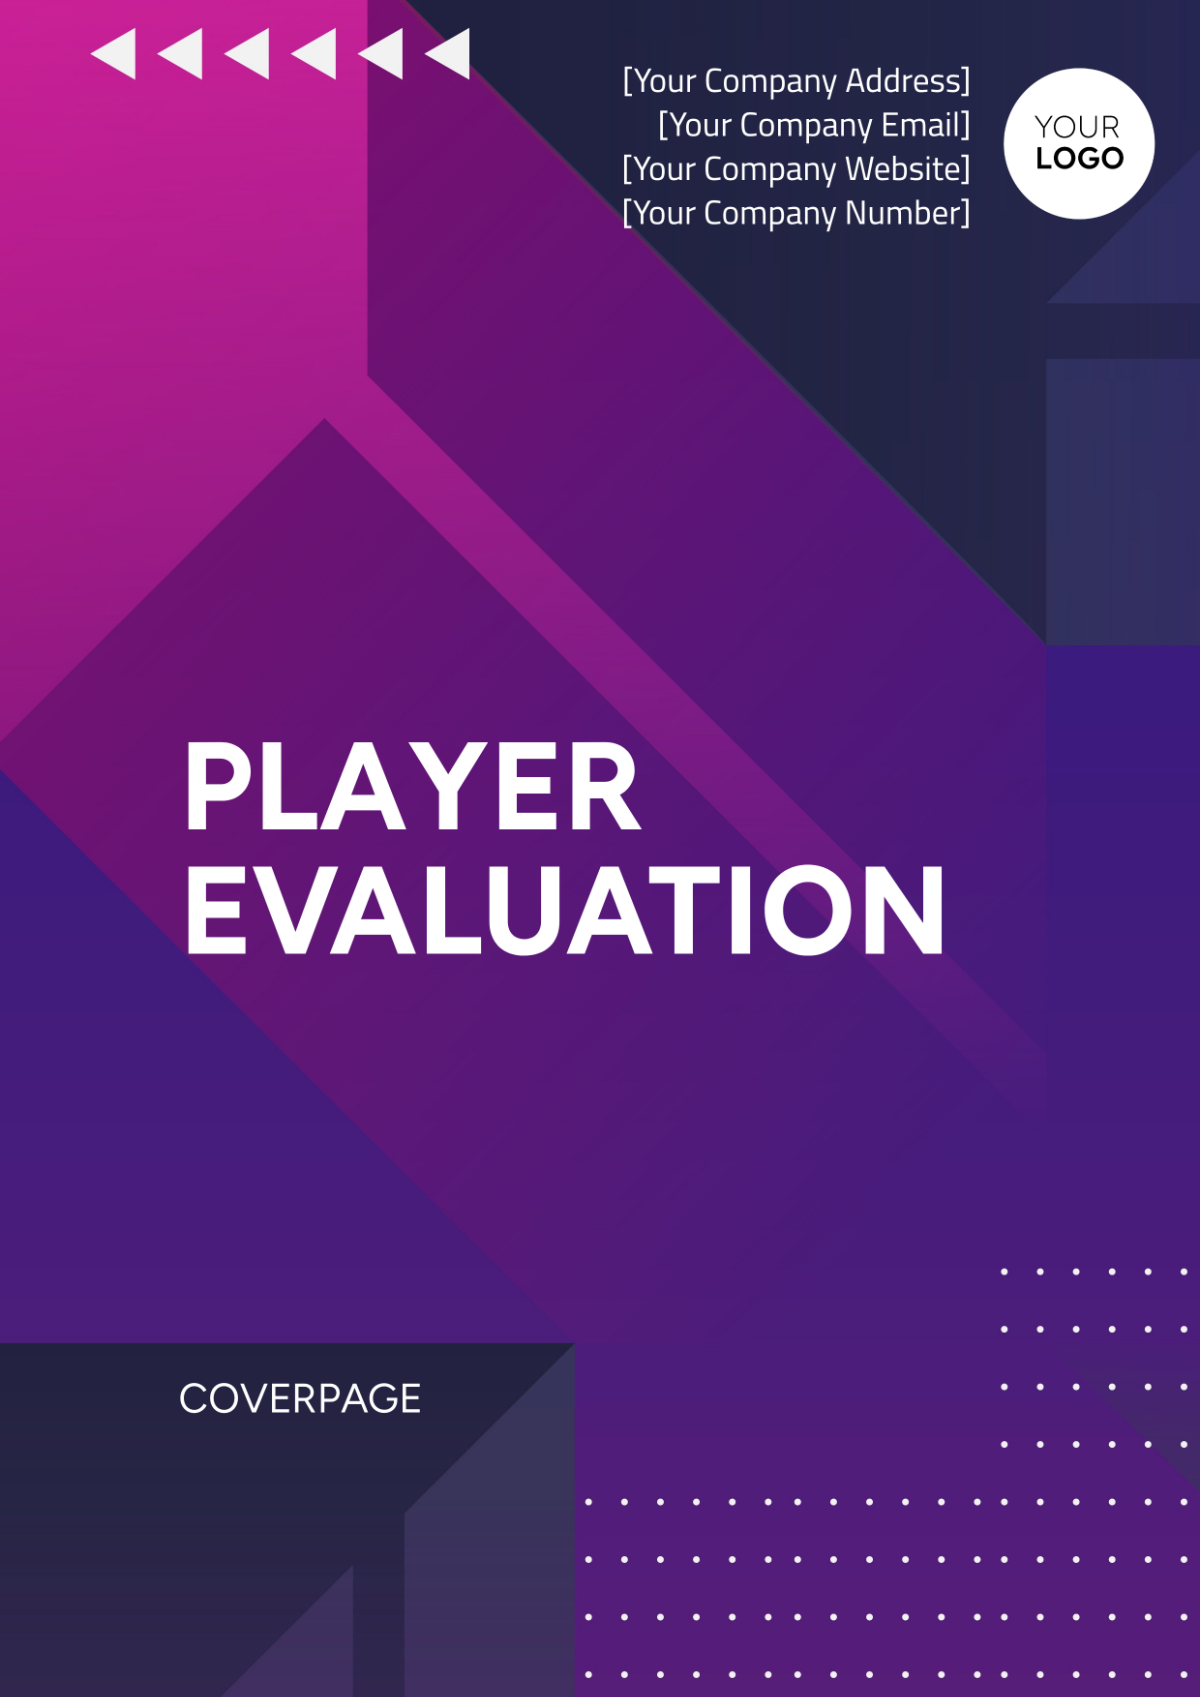 Player Evaluation Cover Page